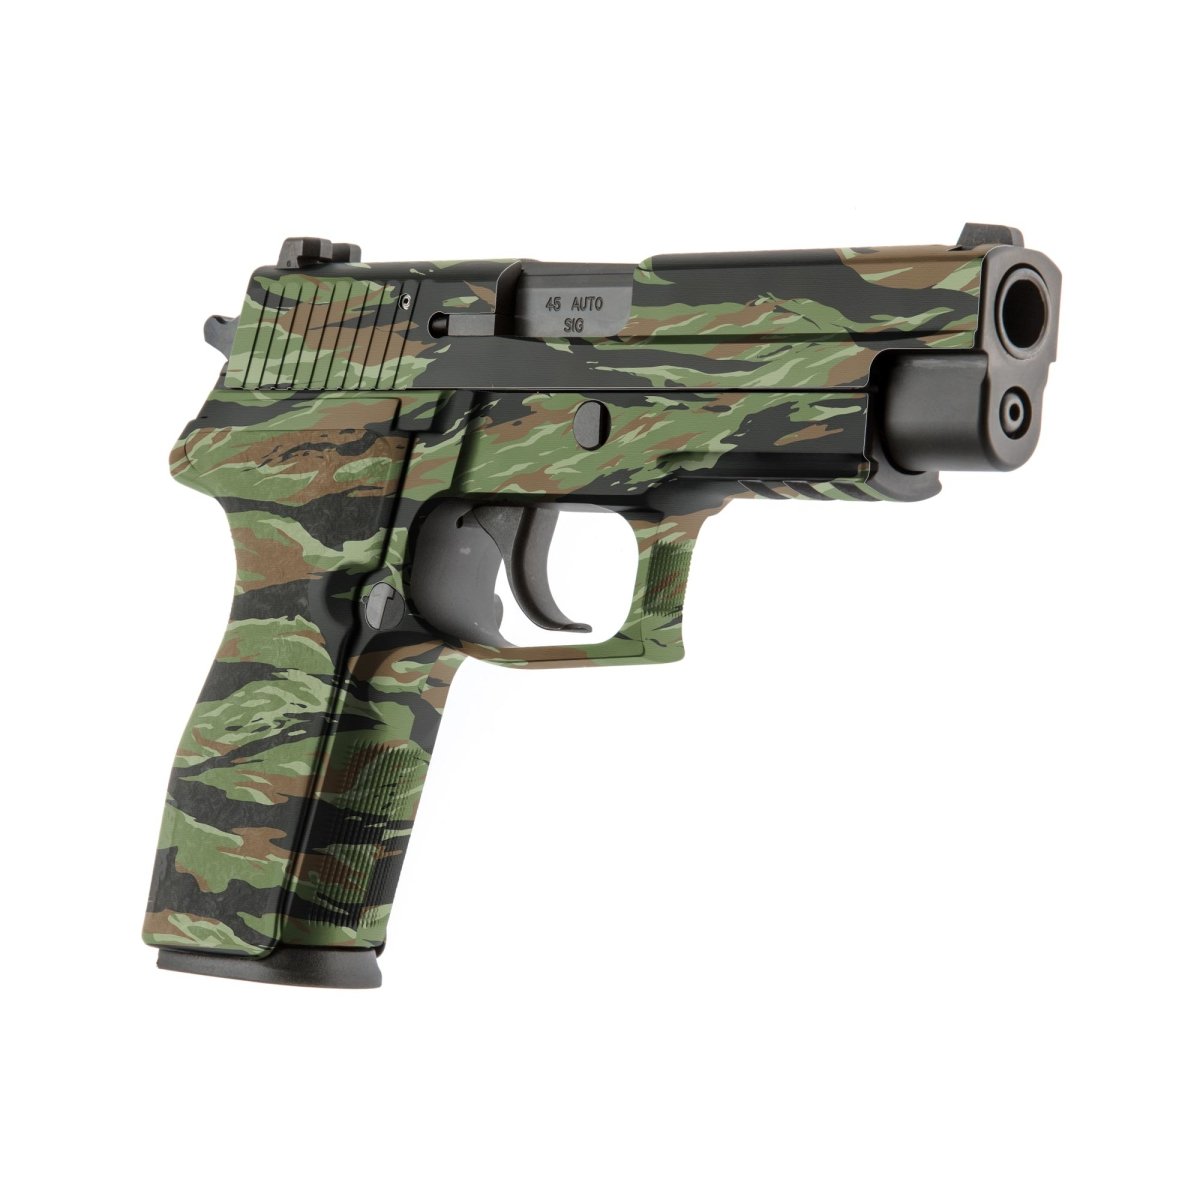  GunSkins Pistol Skin - Premium Vinyl Gun Wrap with Precut  Pieces - Easy to Install and Fits Any Handgun - 100% Waterproof  Non-Reflective Matte Finish - A-TACS ATX : Sports & Outdoors